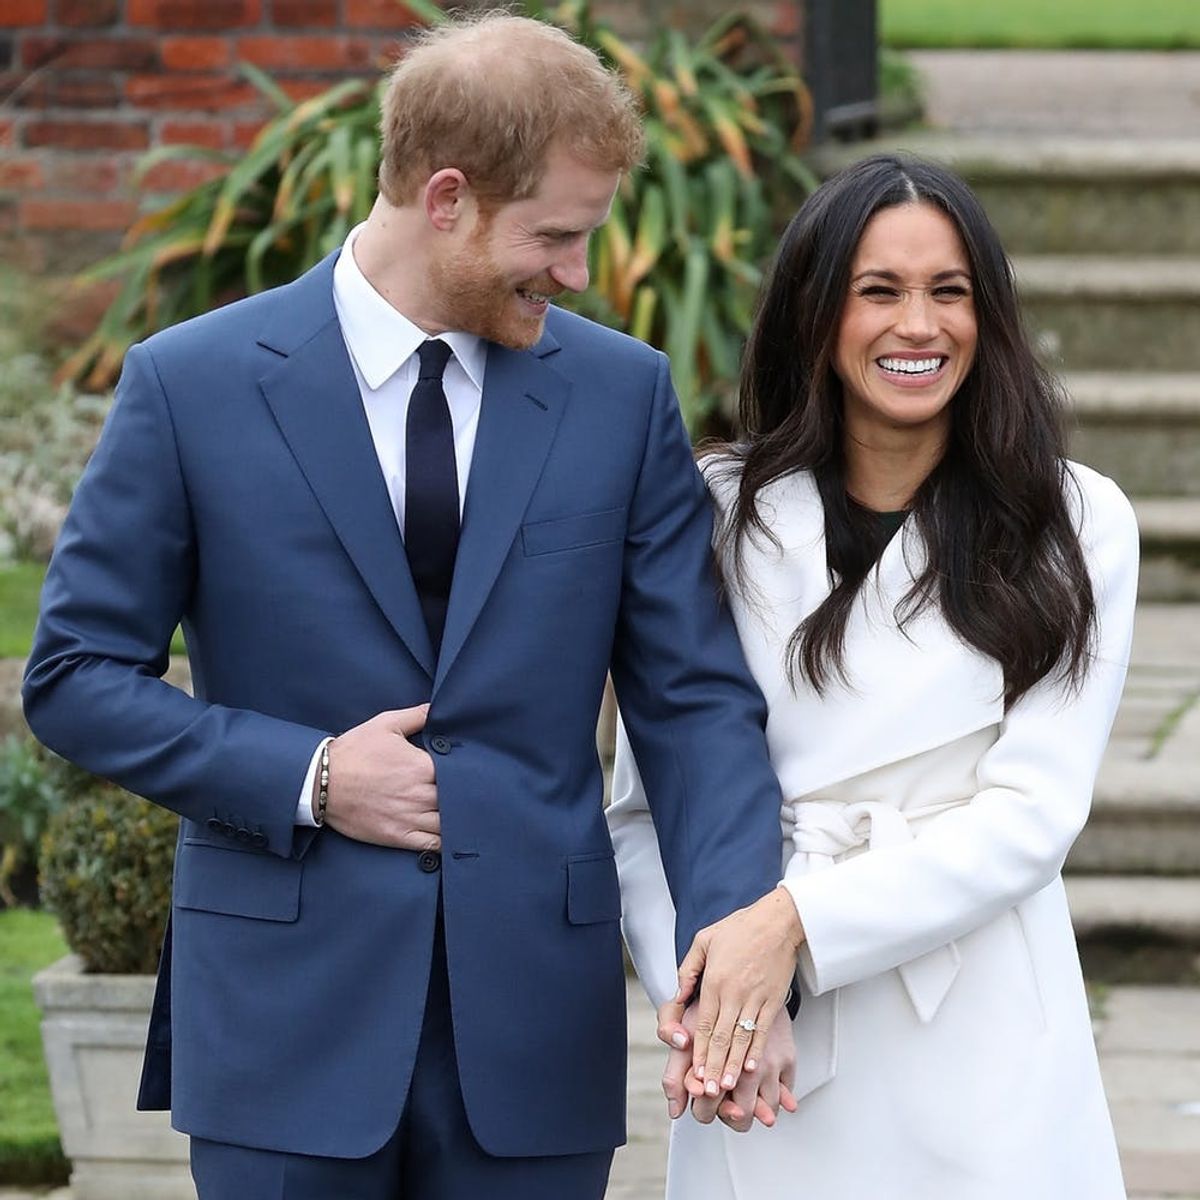 The Dress Code for the Royal Wedding Might Actually Surprise You